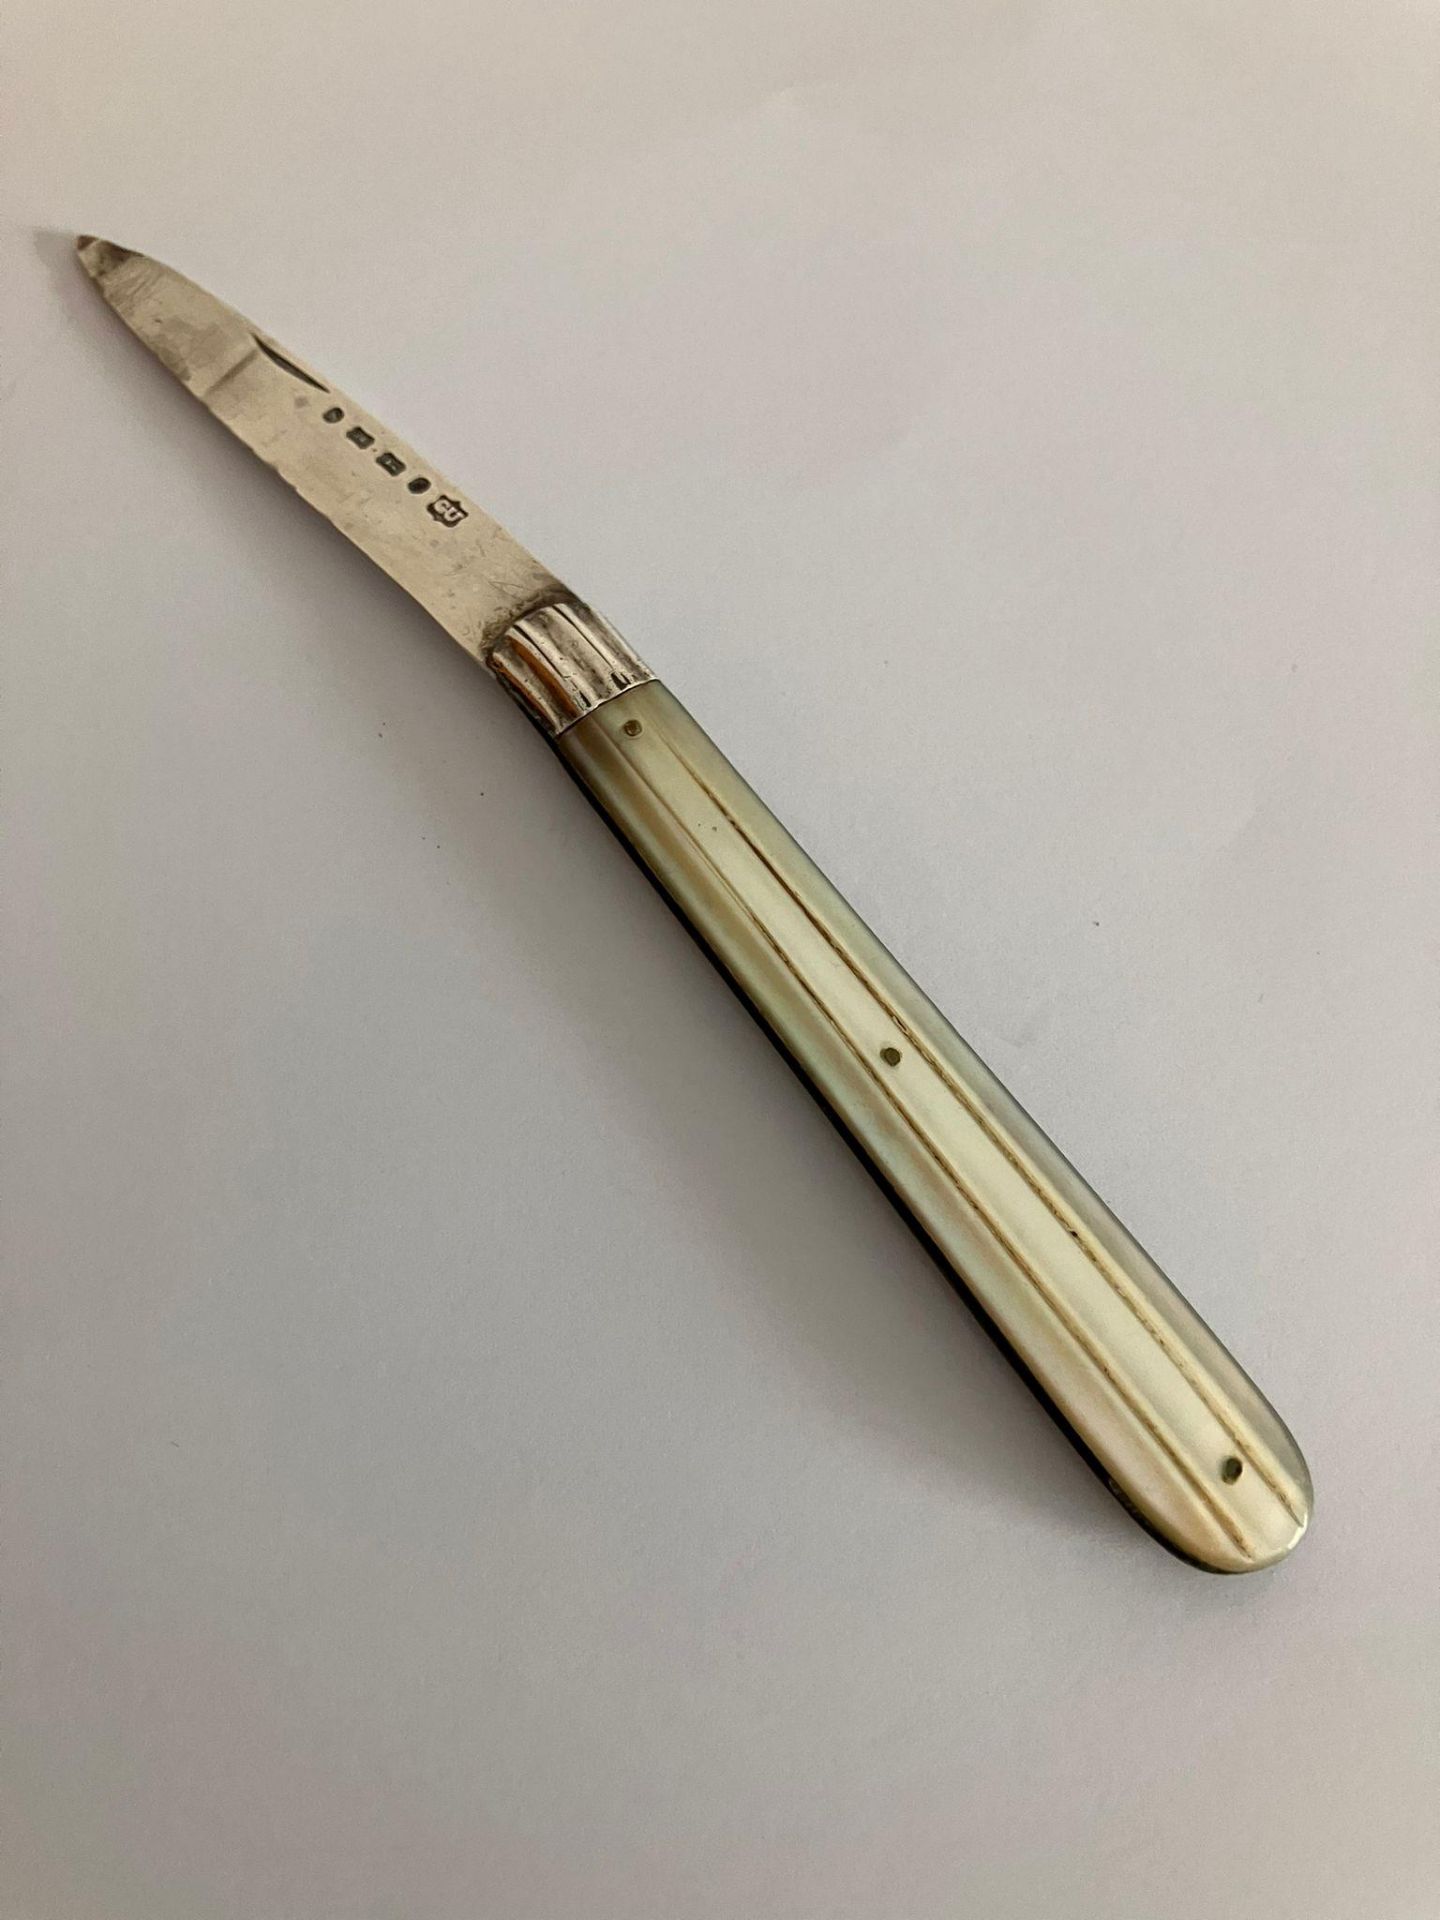 Antique SILVER BLADED Fruit knife, having mother of pearl handle and hallmark for George Unite, - Image 2 of 2